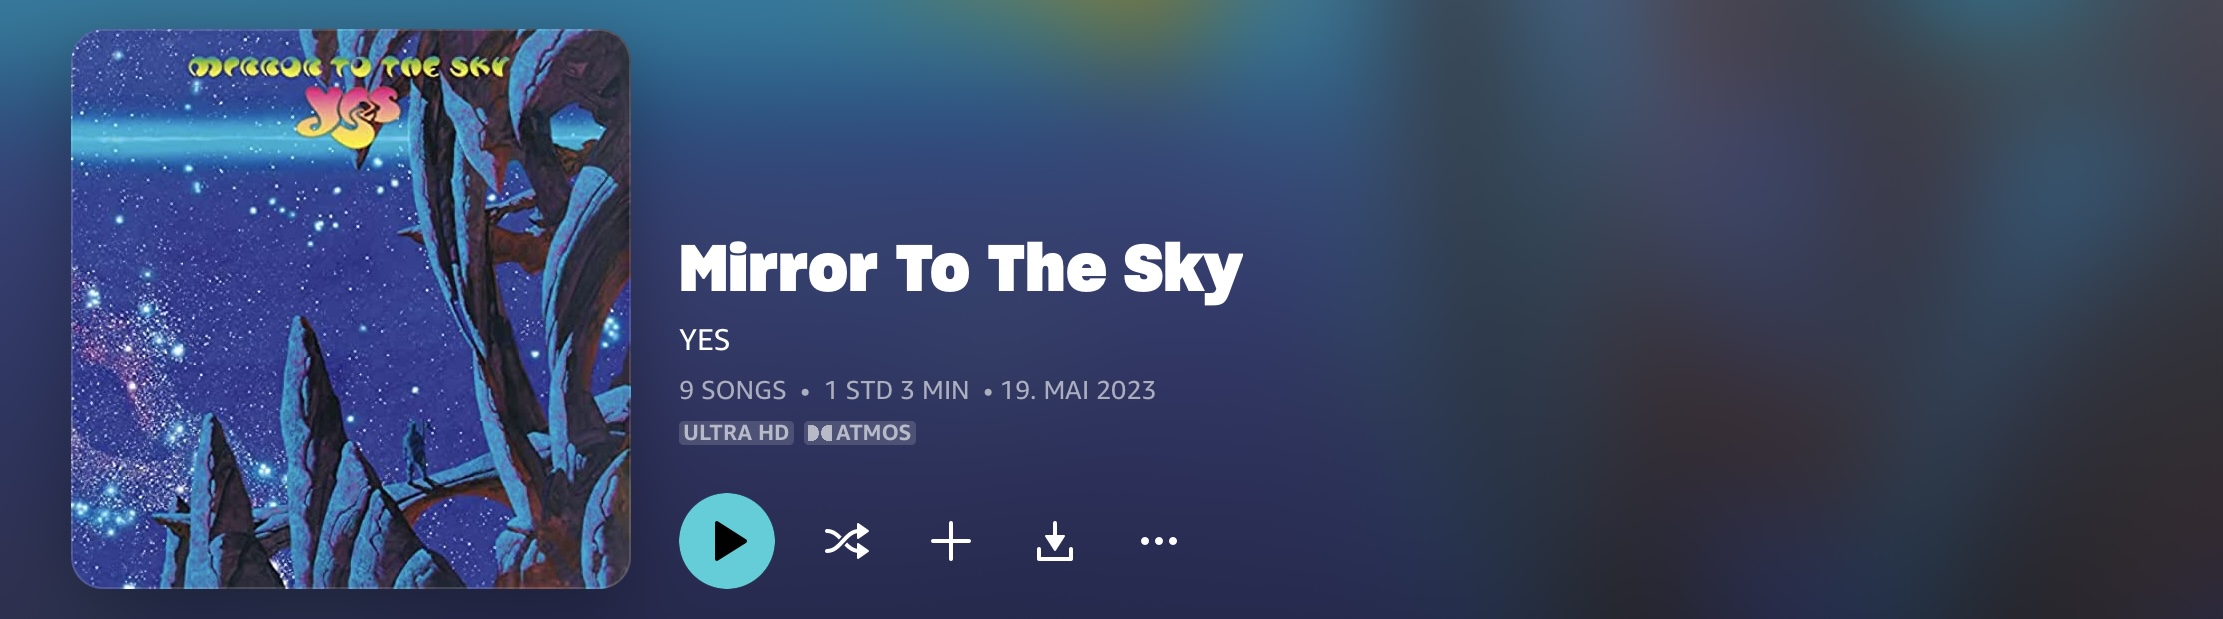 Yes Mirror To The Sky Dolby Atmos